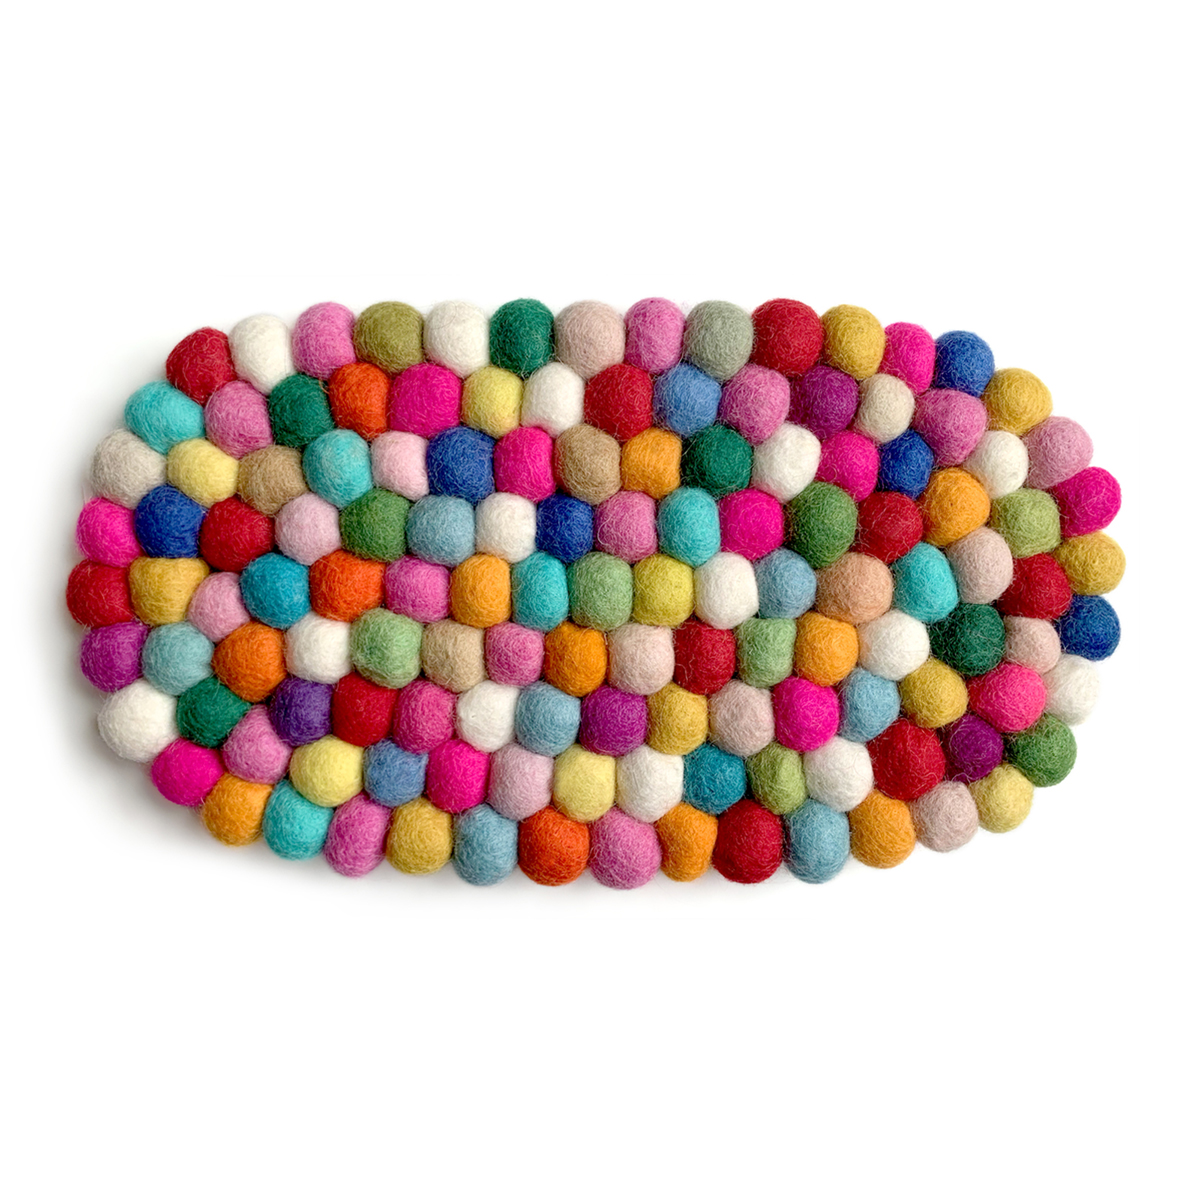 Picture of Felt Ball Trivet Oval - Colorful